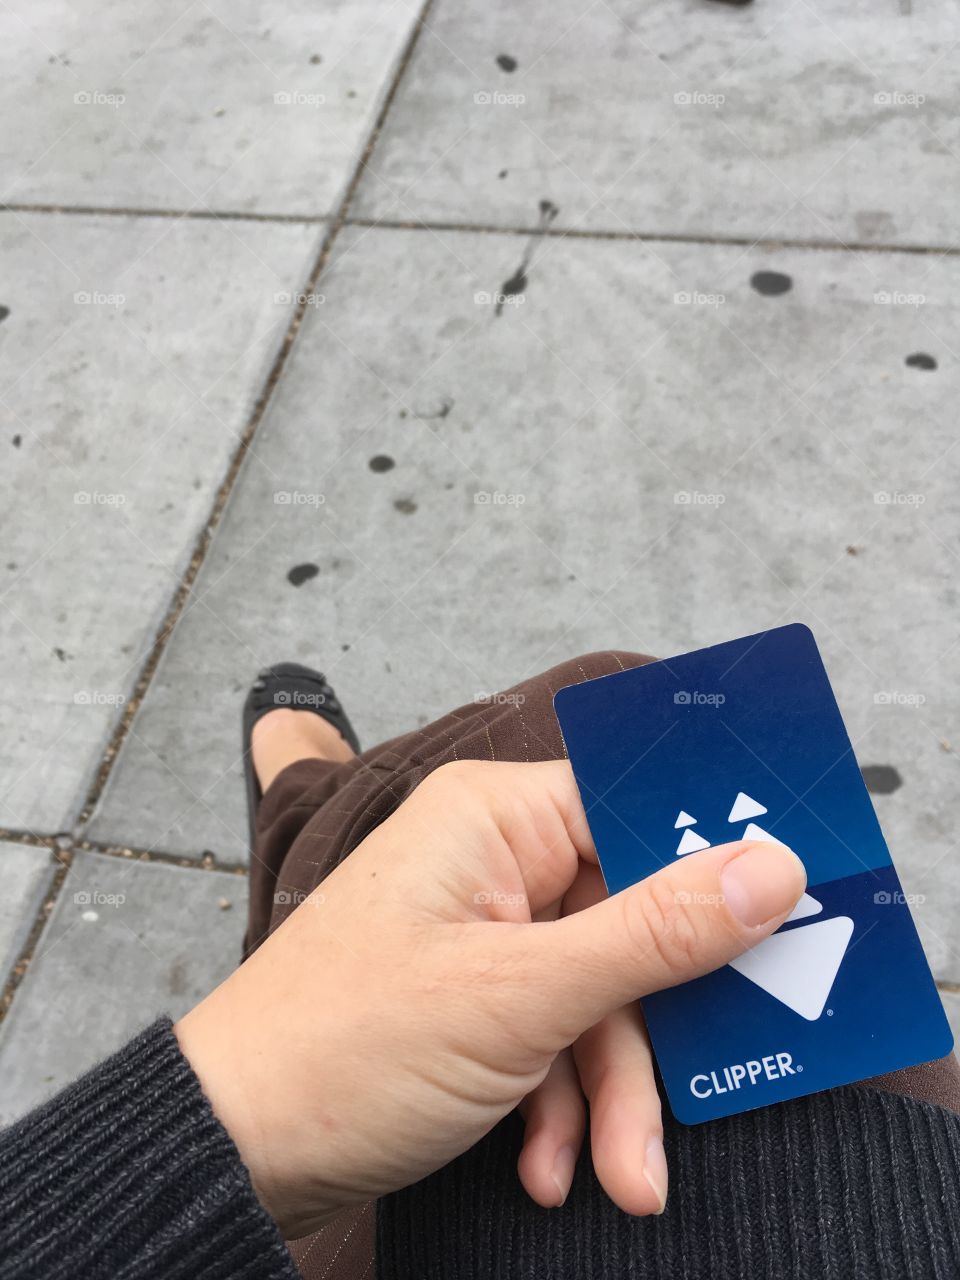 Waiting for a bus holding a blue clipper bus card. Downwards angle with knee, leg, and sidewalk